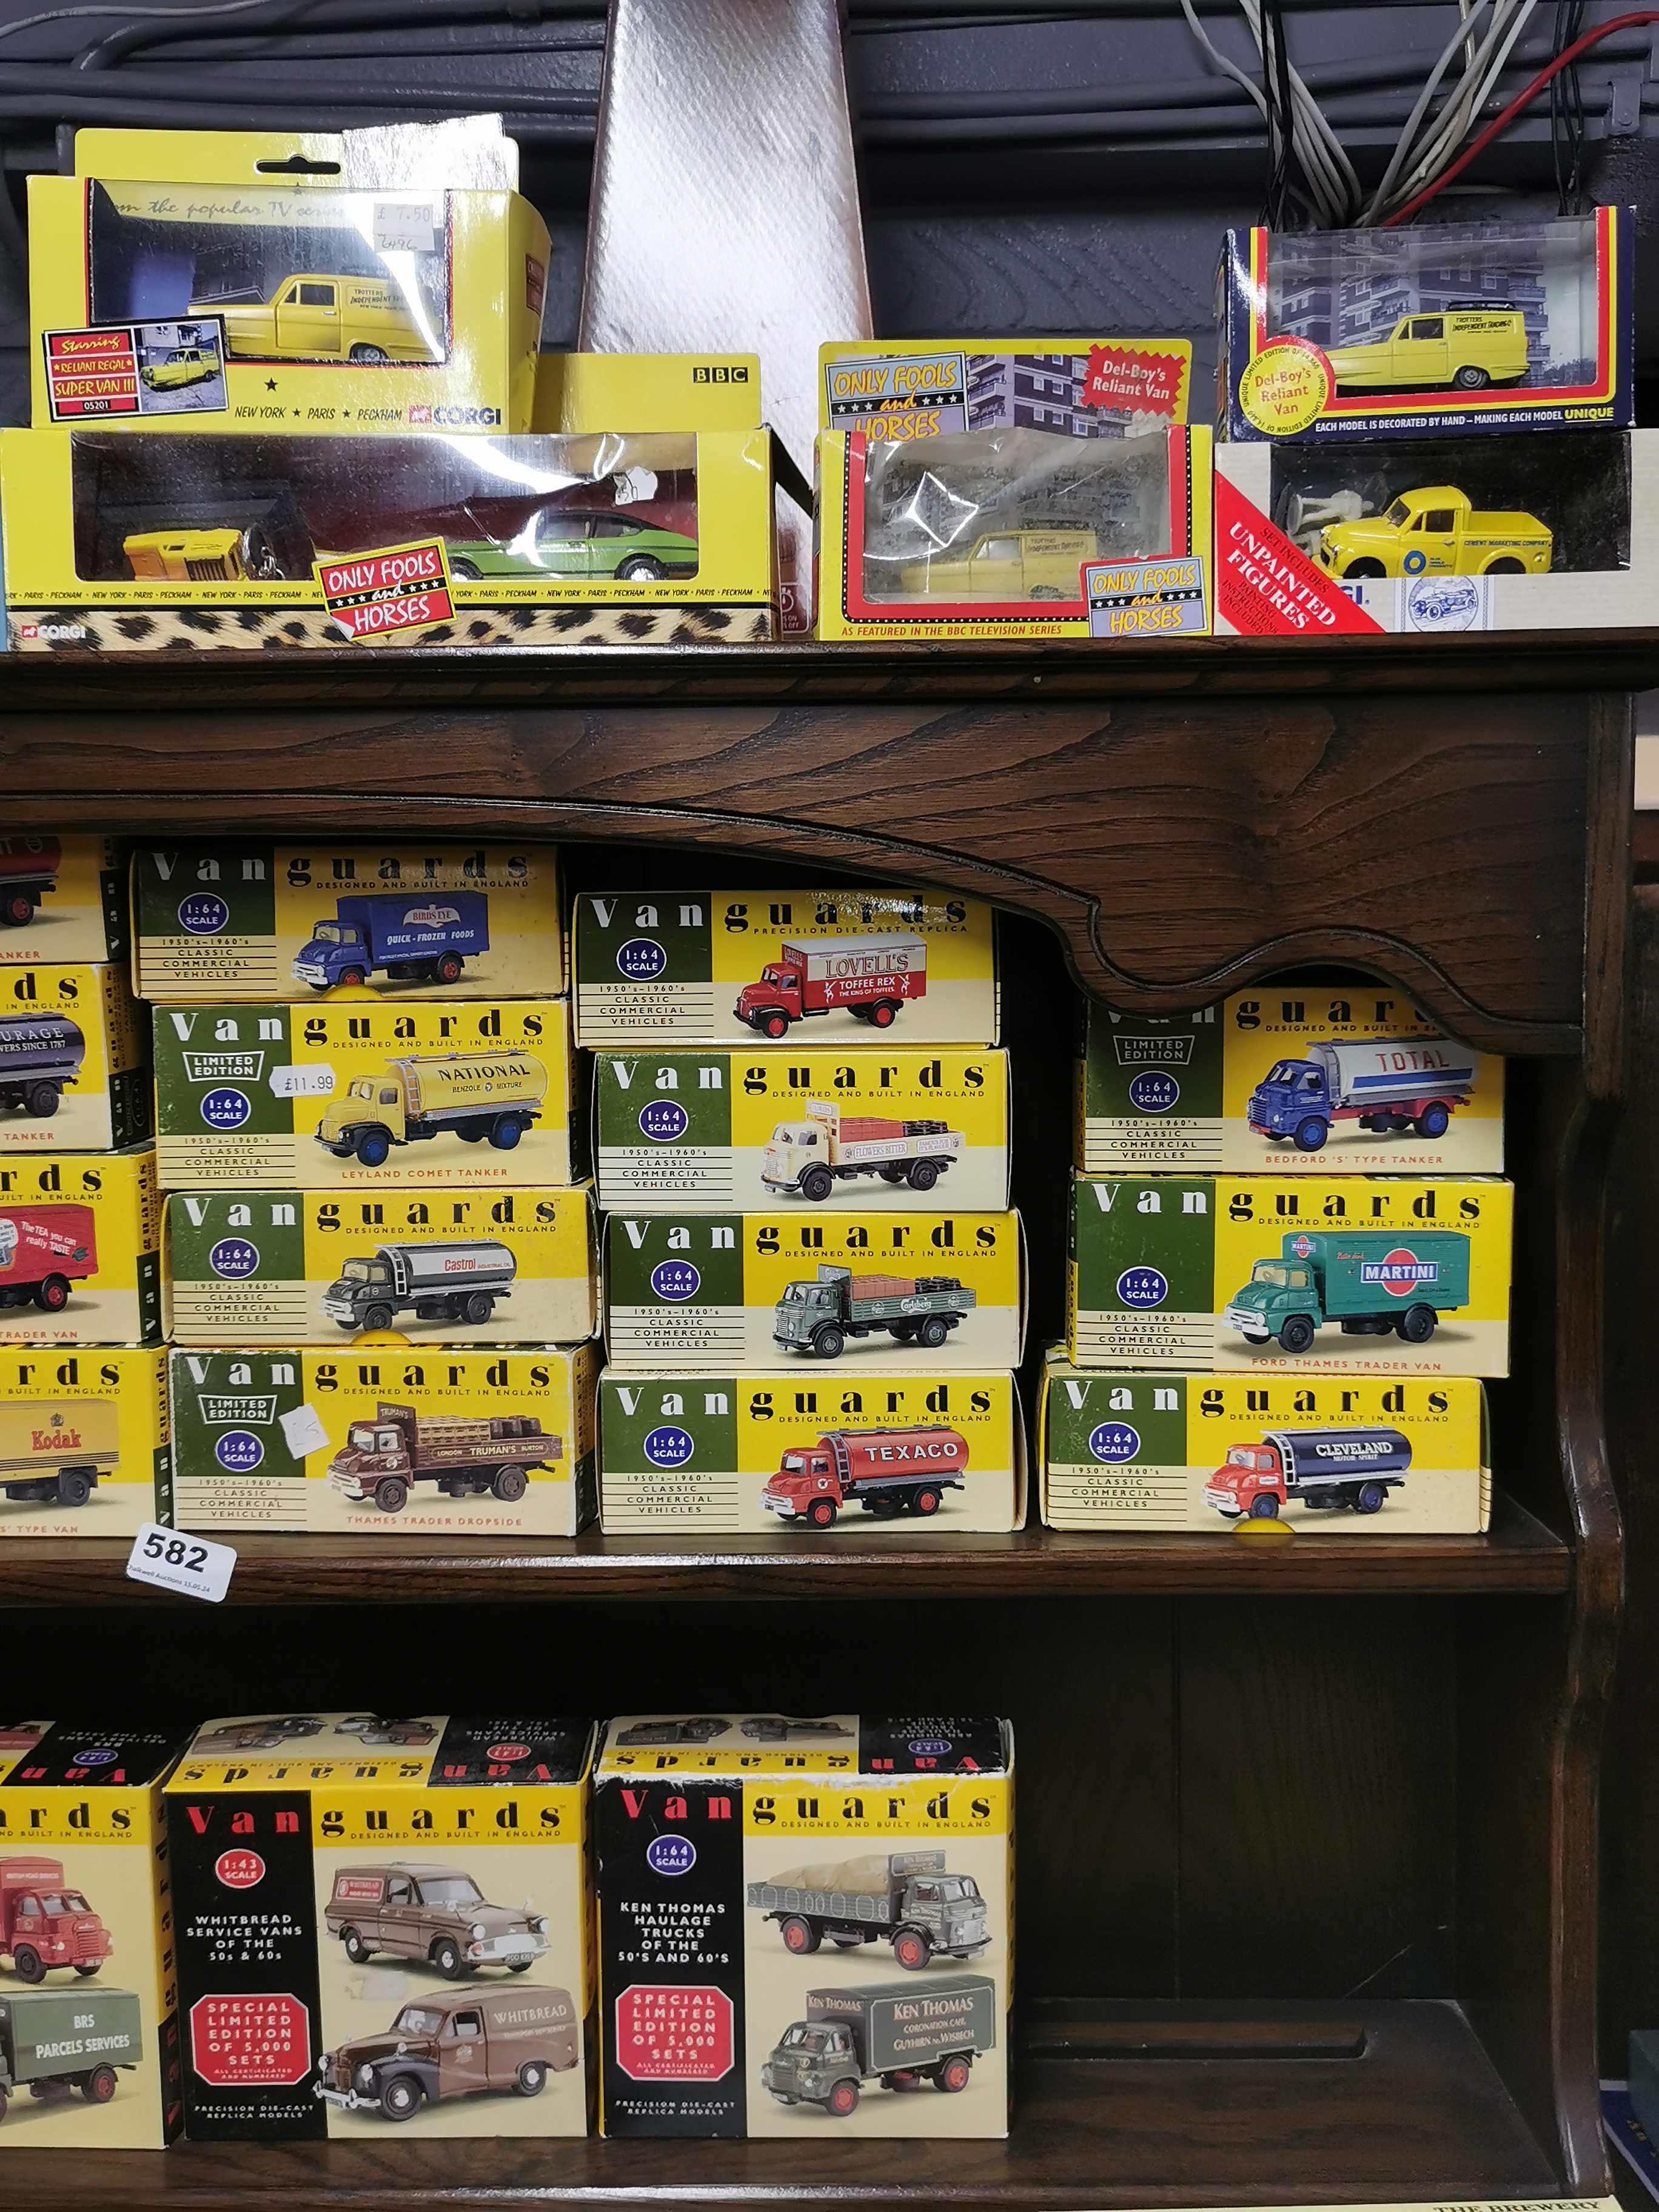 A quantity of Vanguard diecast model vehicles with Corgi Only Fools and Horses. - Image 3 of 3